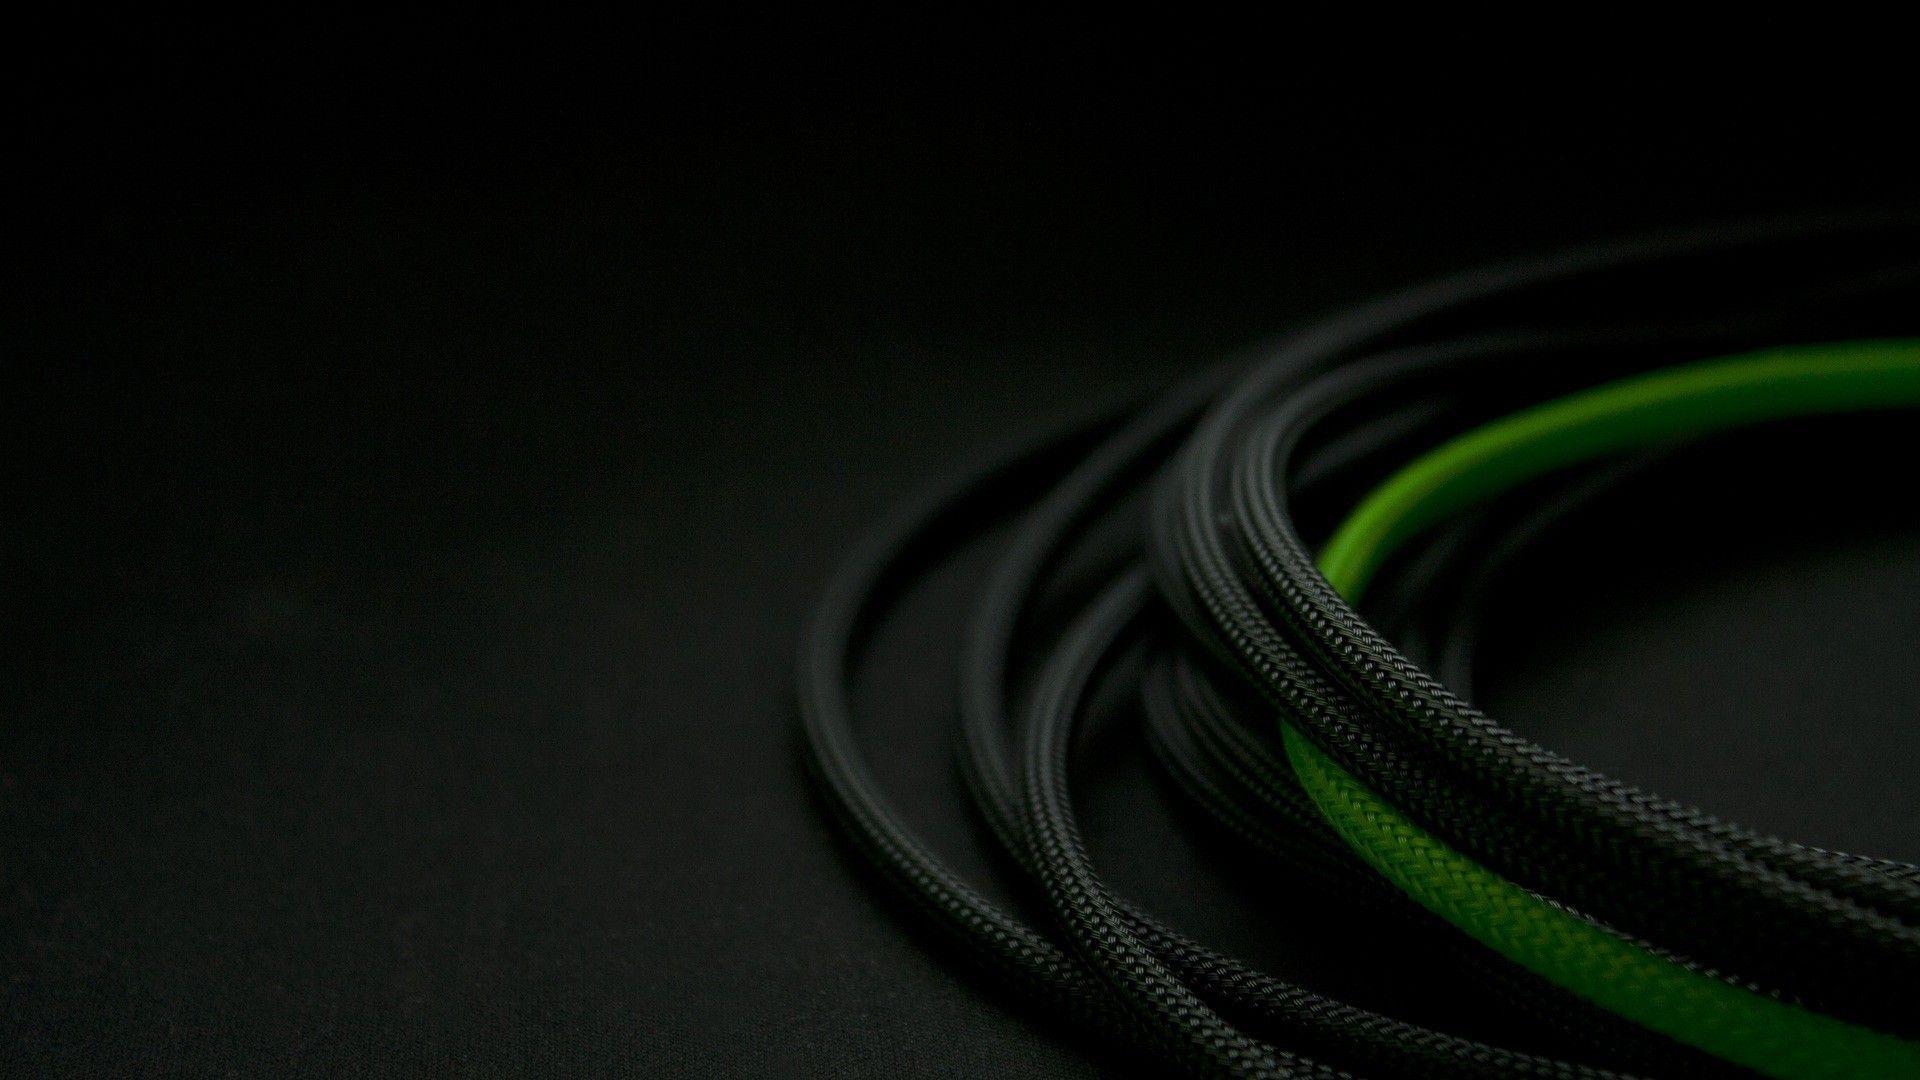 Wallpaper For > Black And Green Wallpaper 1920x1080